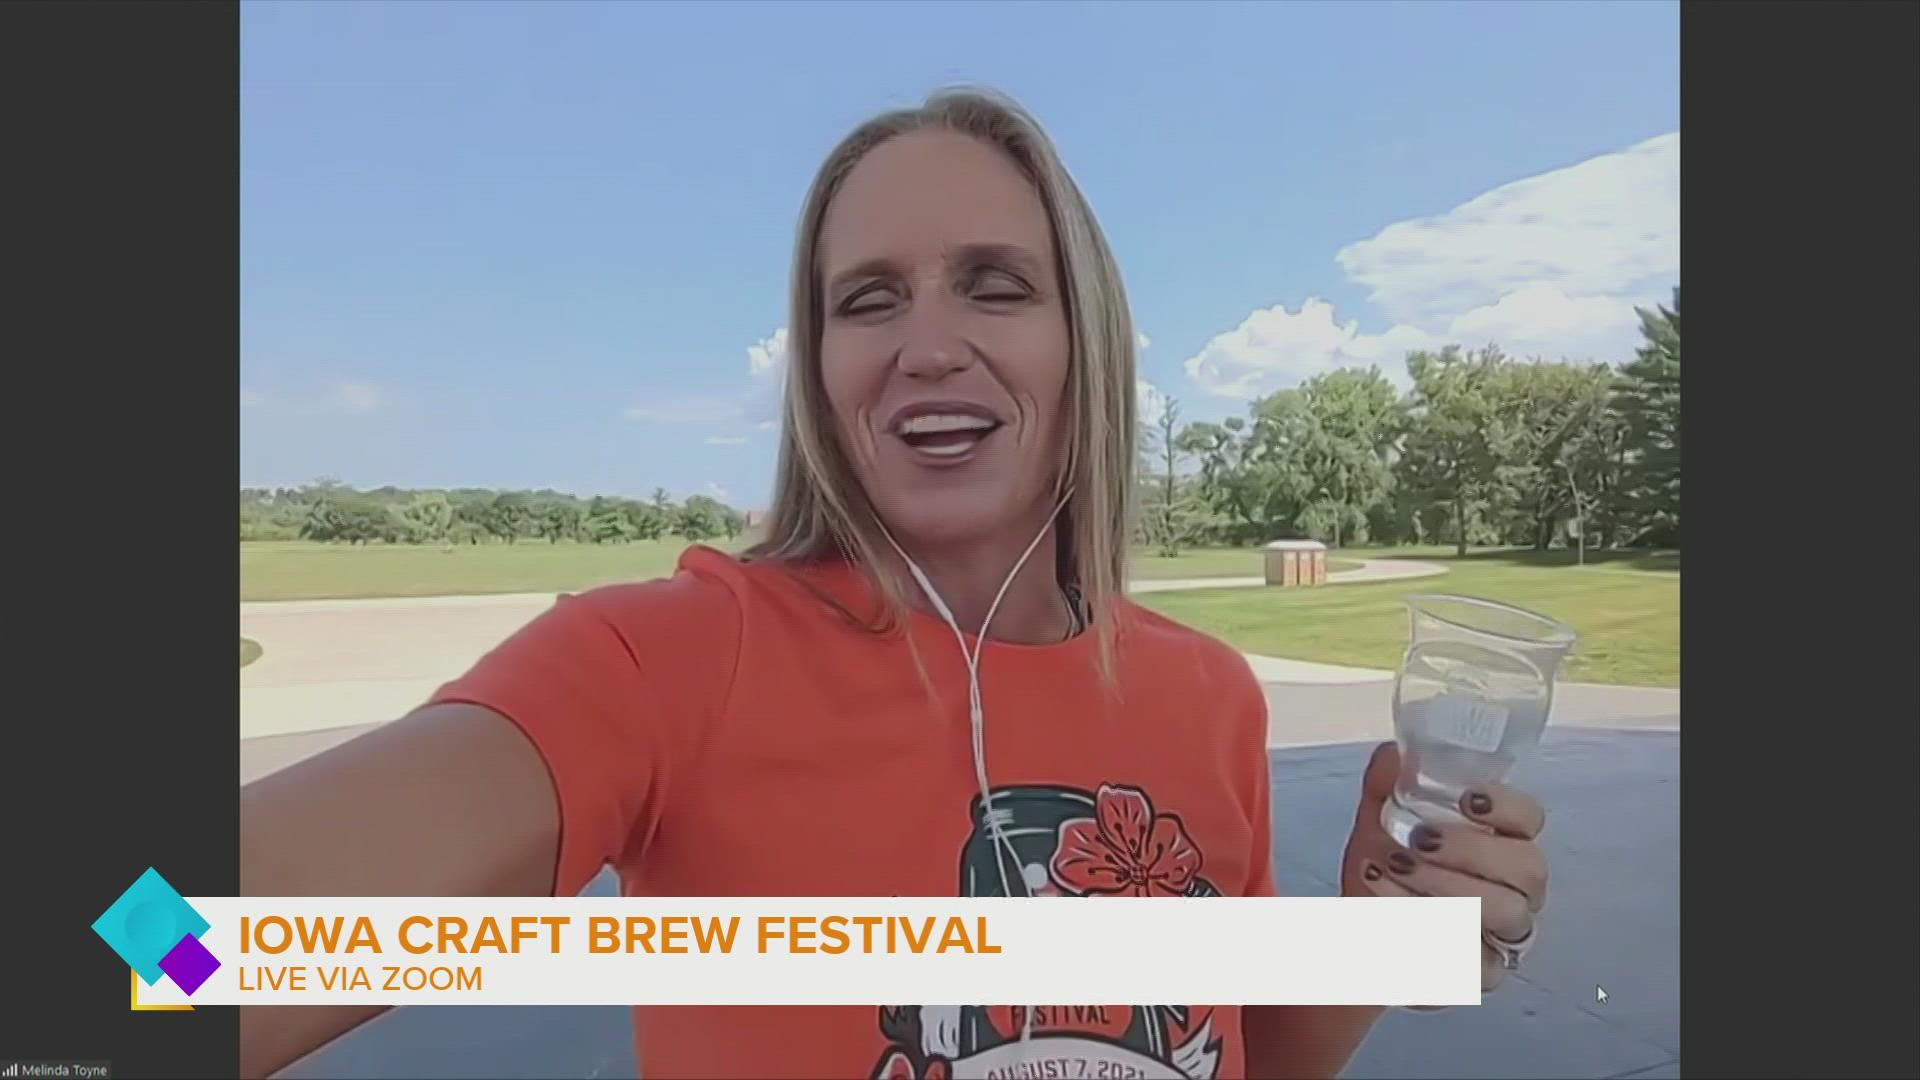 Mindy Toyne, Event Director - Iowa Craft Brew Festival, talks about the new location of this year's gathering, live music and sampling available.